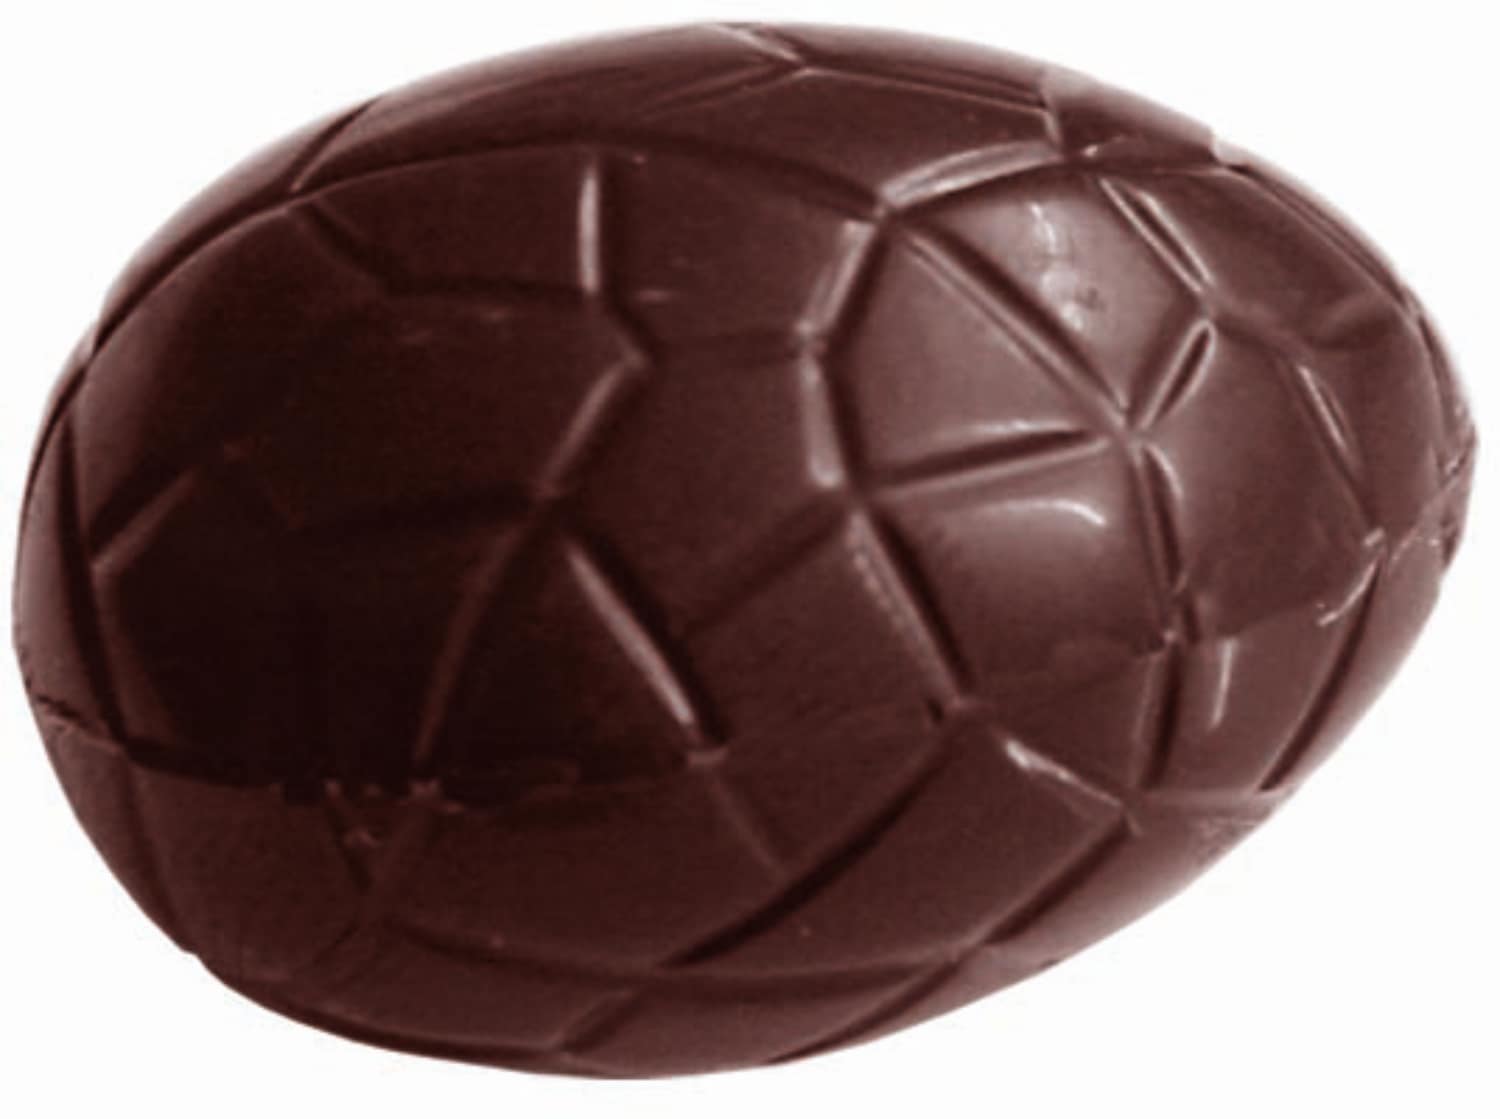 Chocolate mould "Easter egg" 421537